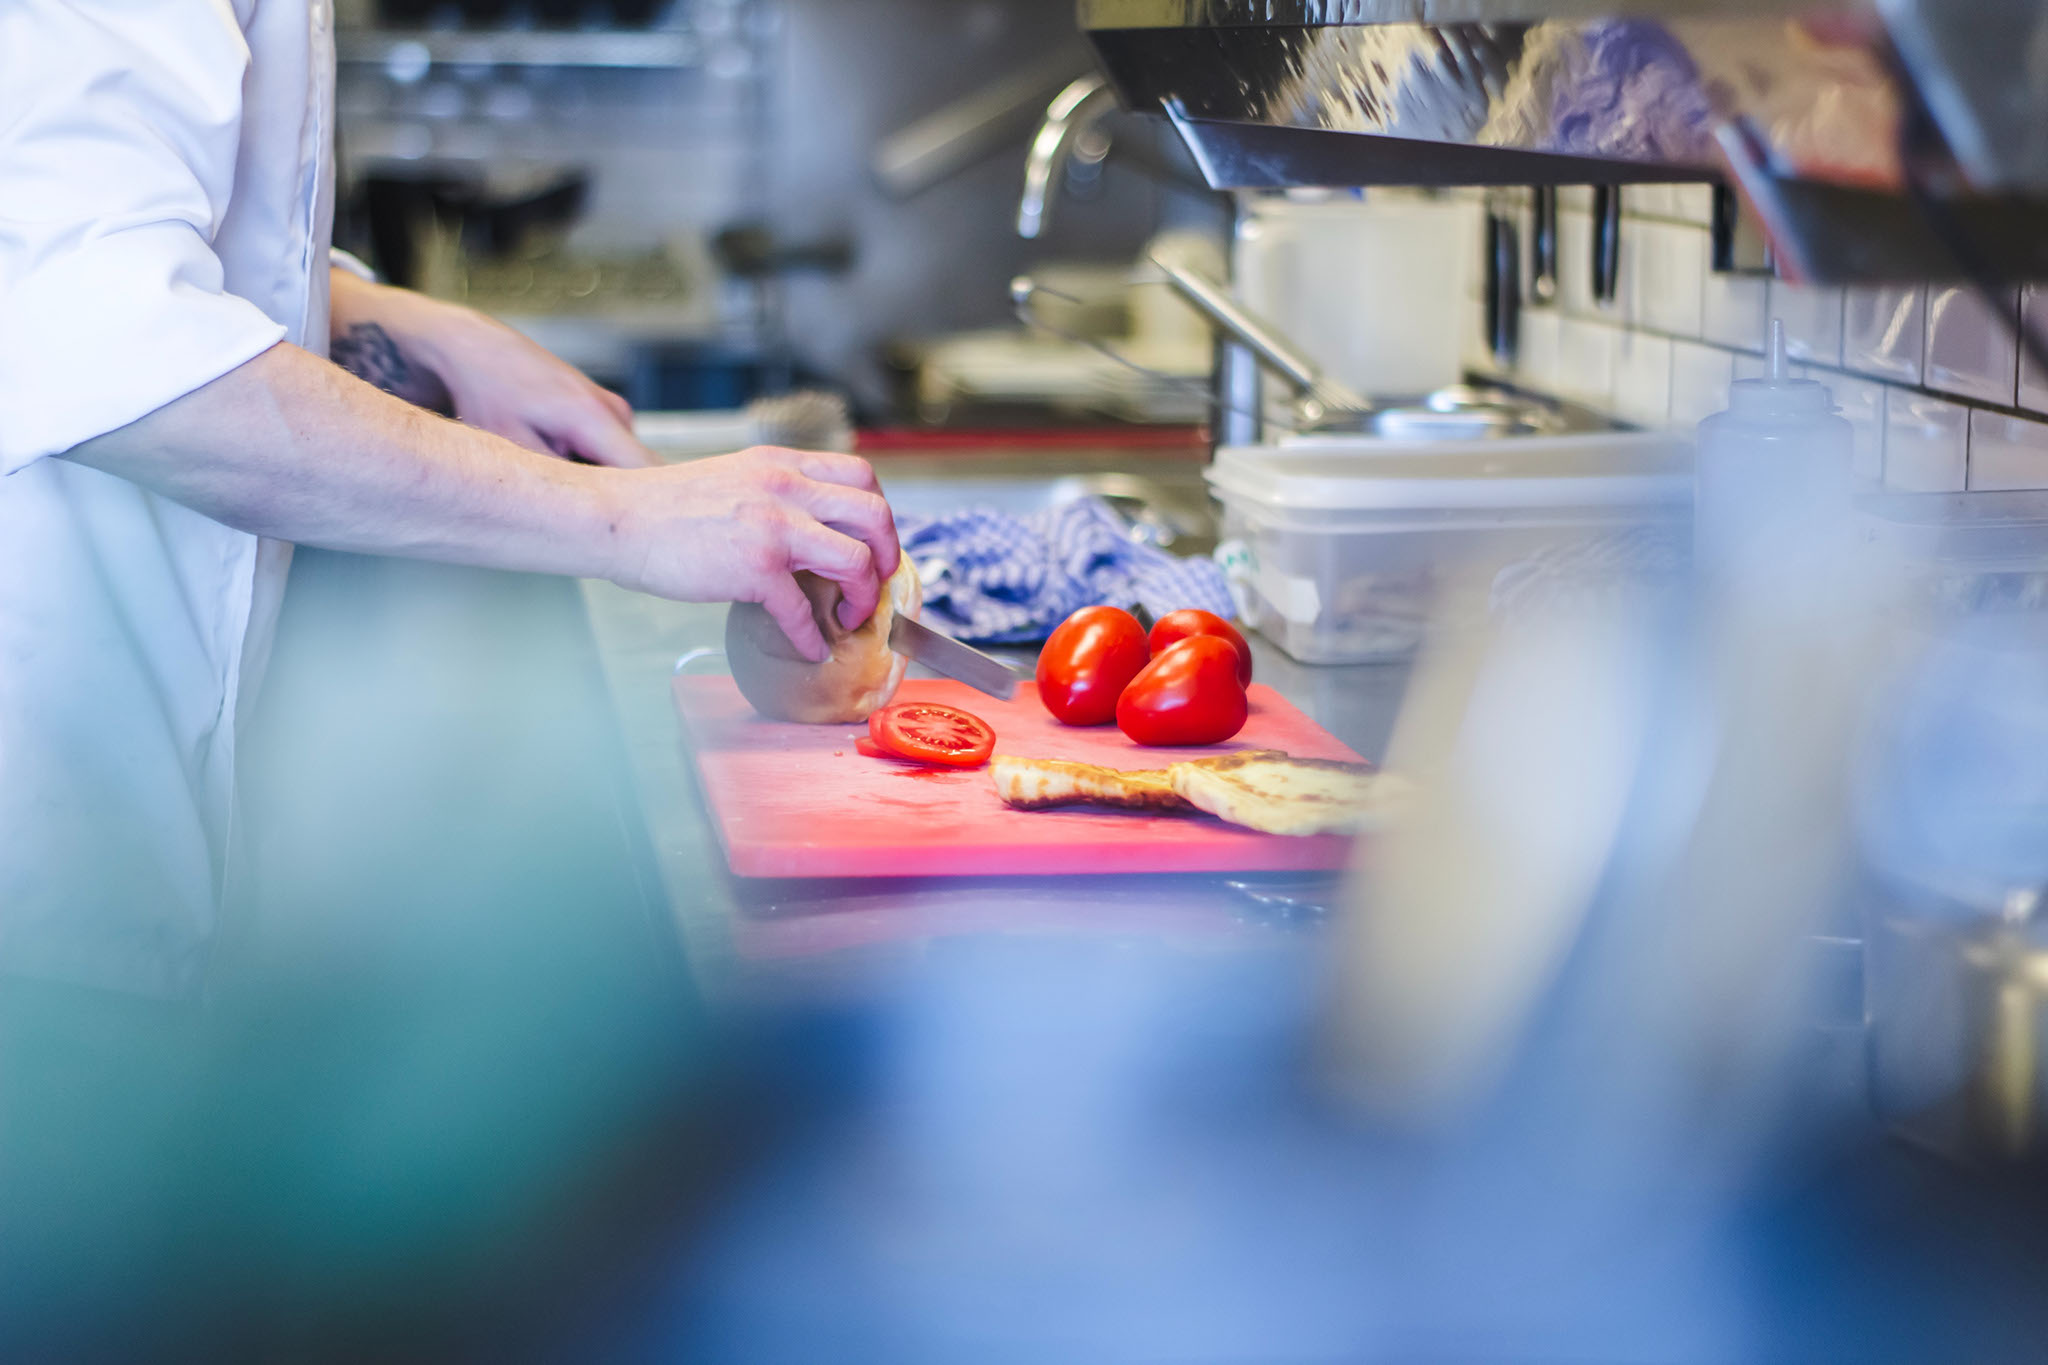 A school chef prepares school meals in the canteen kitchen.